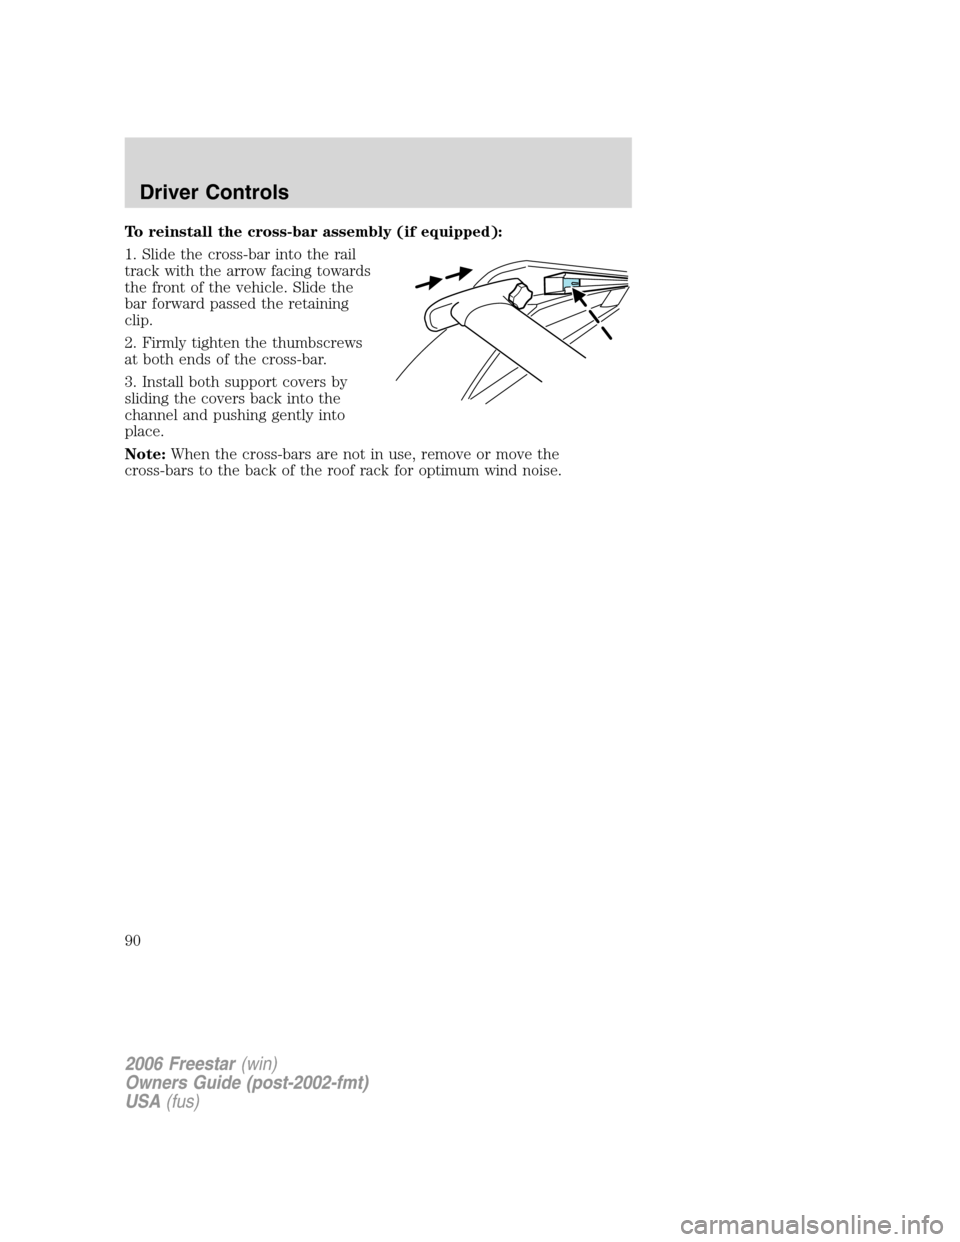 FORD FREESTAR 2006 1.G Owners Manual To reinstall the cross-bar assembly (if equipped):
1. Slide the cross-bar into the rail
track with the arrow facing towards
the front of the vehicle. Slide the
bar forward passed the retaining
clip.
2